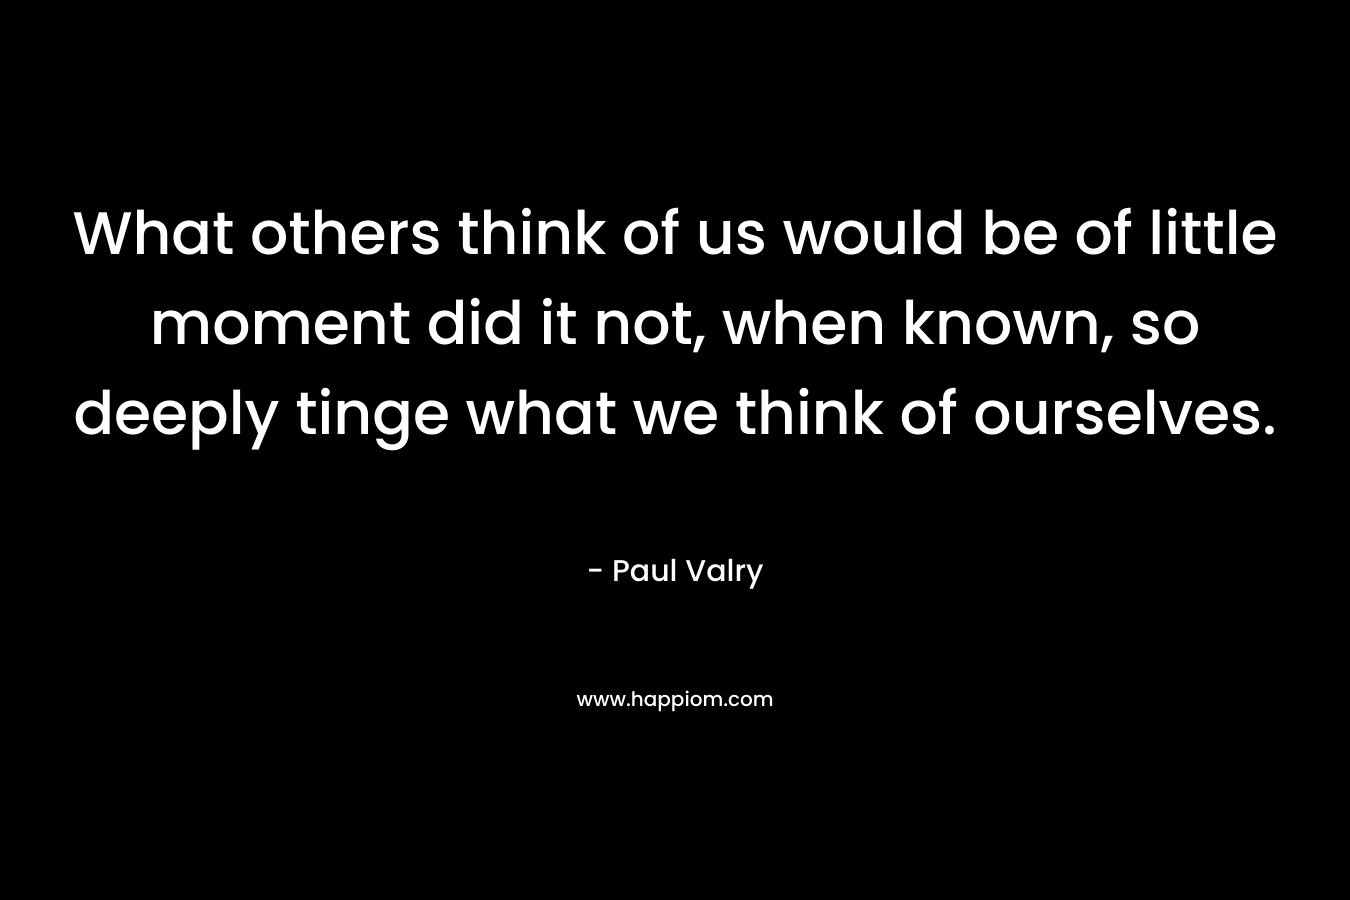 What others think of us would be of little moment did it not, when known, so deeply tinge what we think of ourselves. – Paul Valry